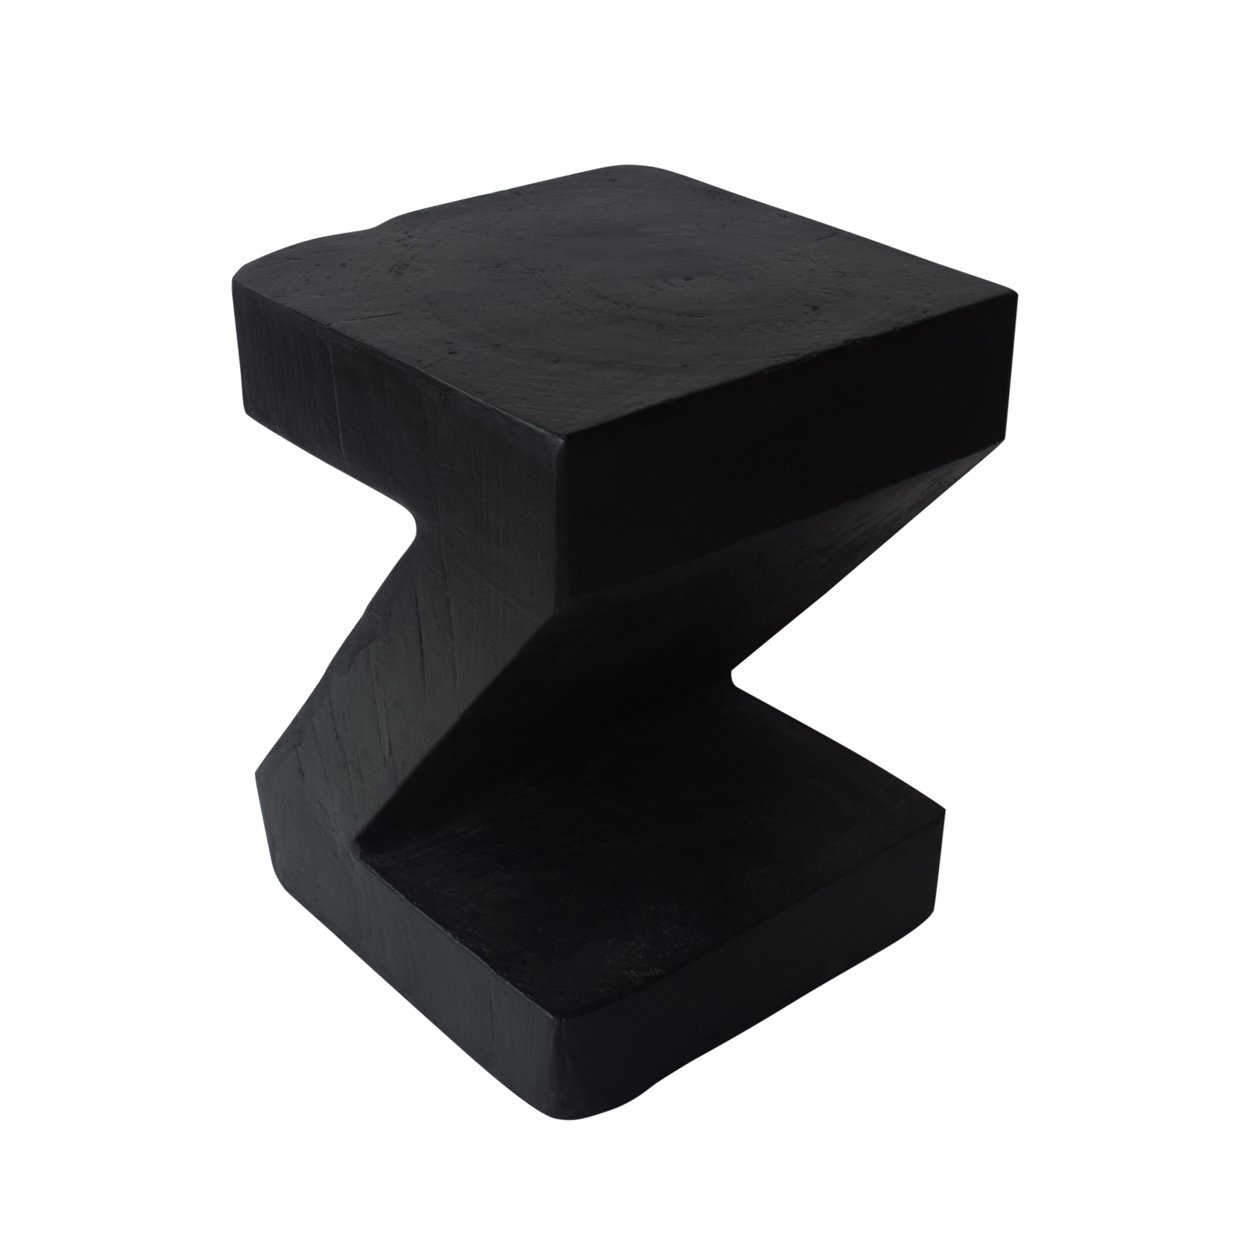 Jingle Outdoor Light-Weight Concrete Accent Table - Black